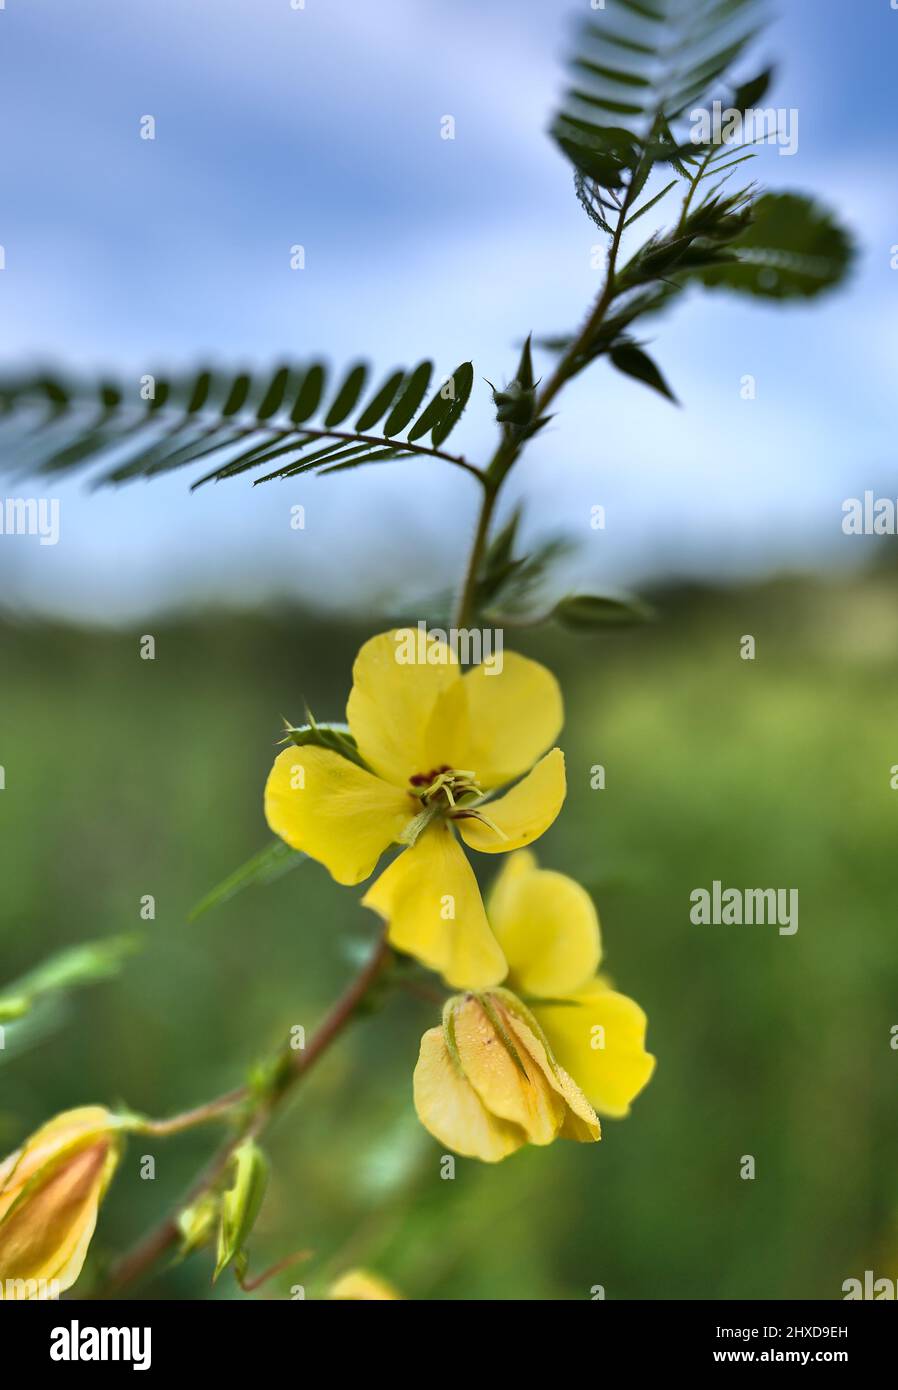 A macro image of a partridge pea plant at full bloom in the fall. Stock Photo